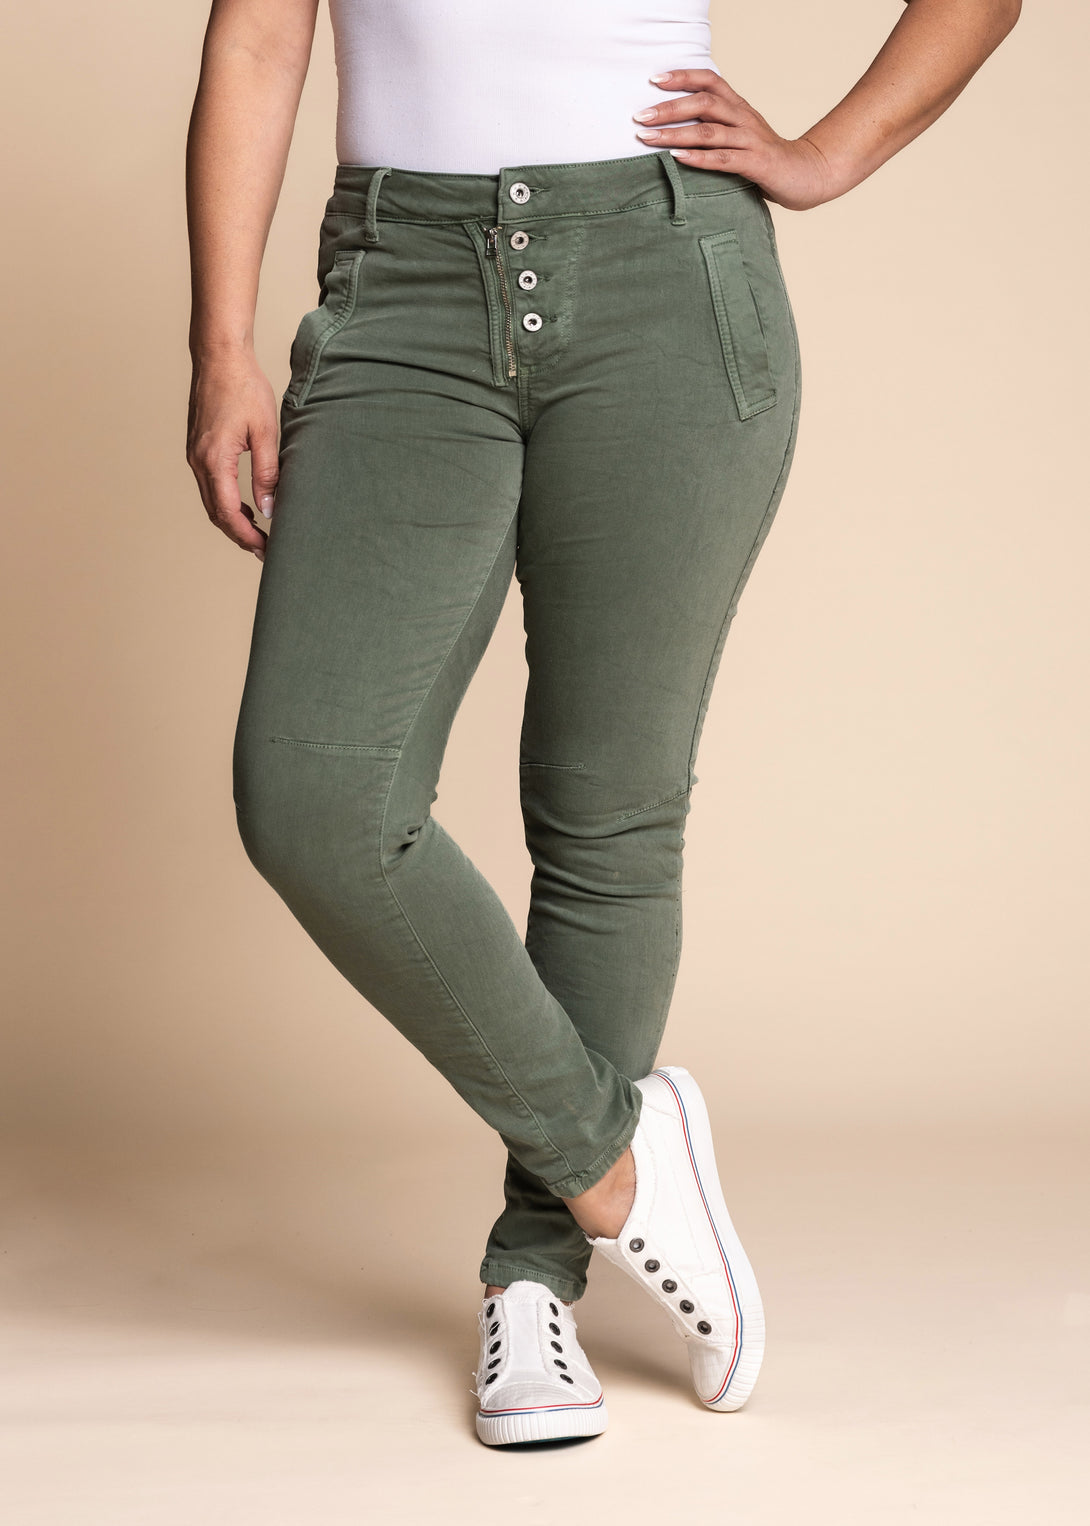 Nessie Pants in Olive - Imagine Fashion